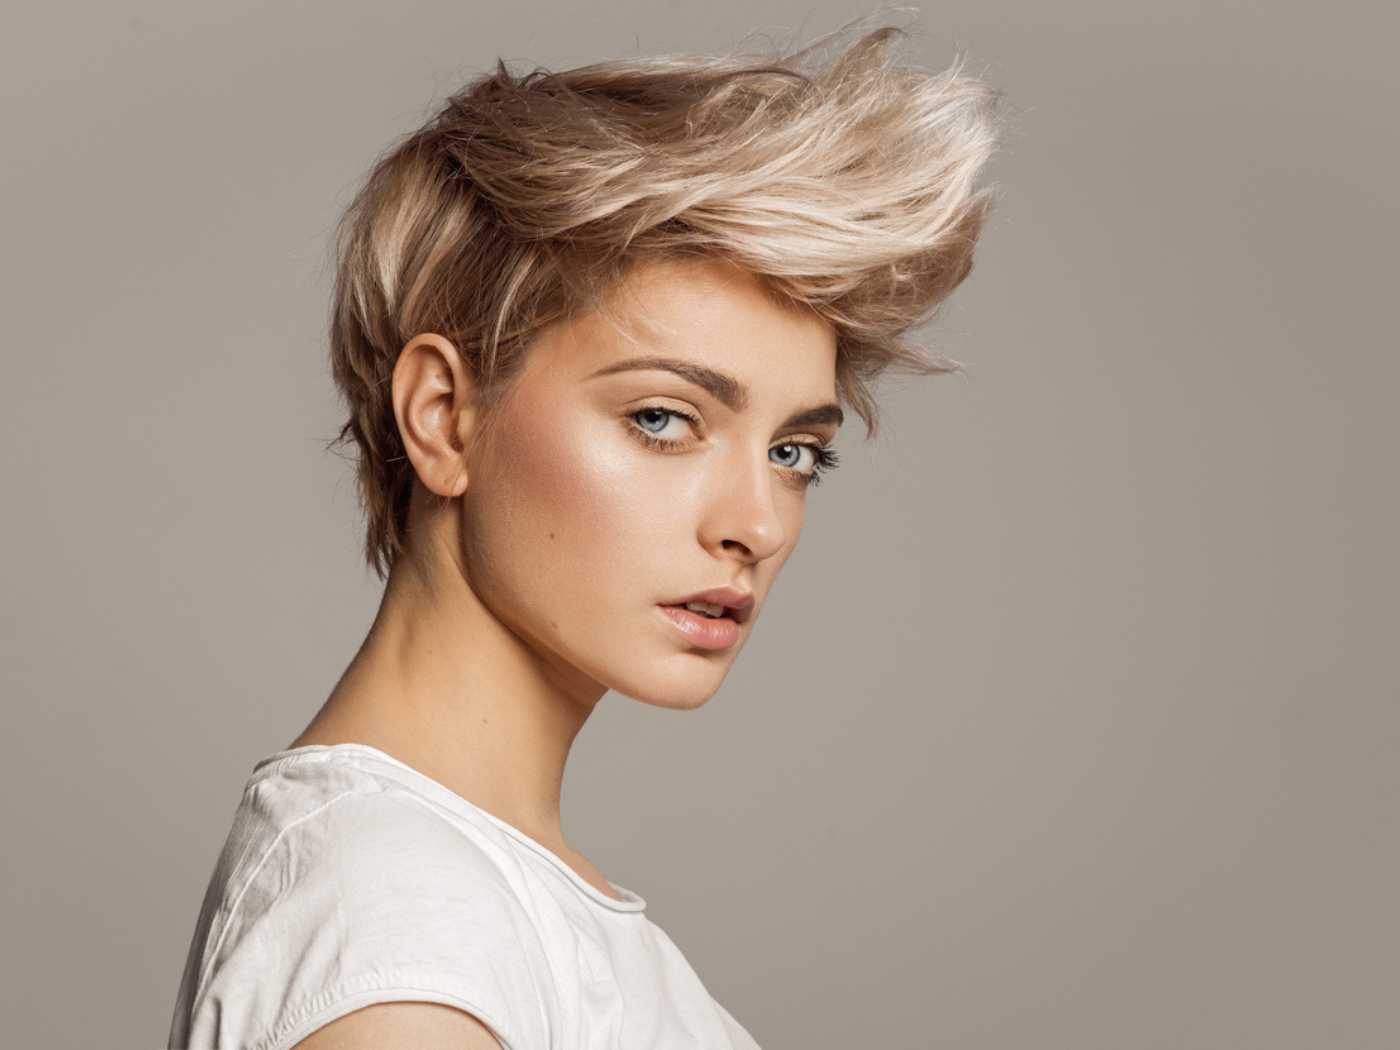 Woman with a pixie haircut facing sideways and looking at the camera